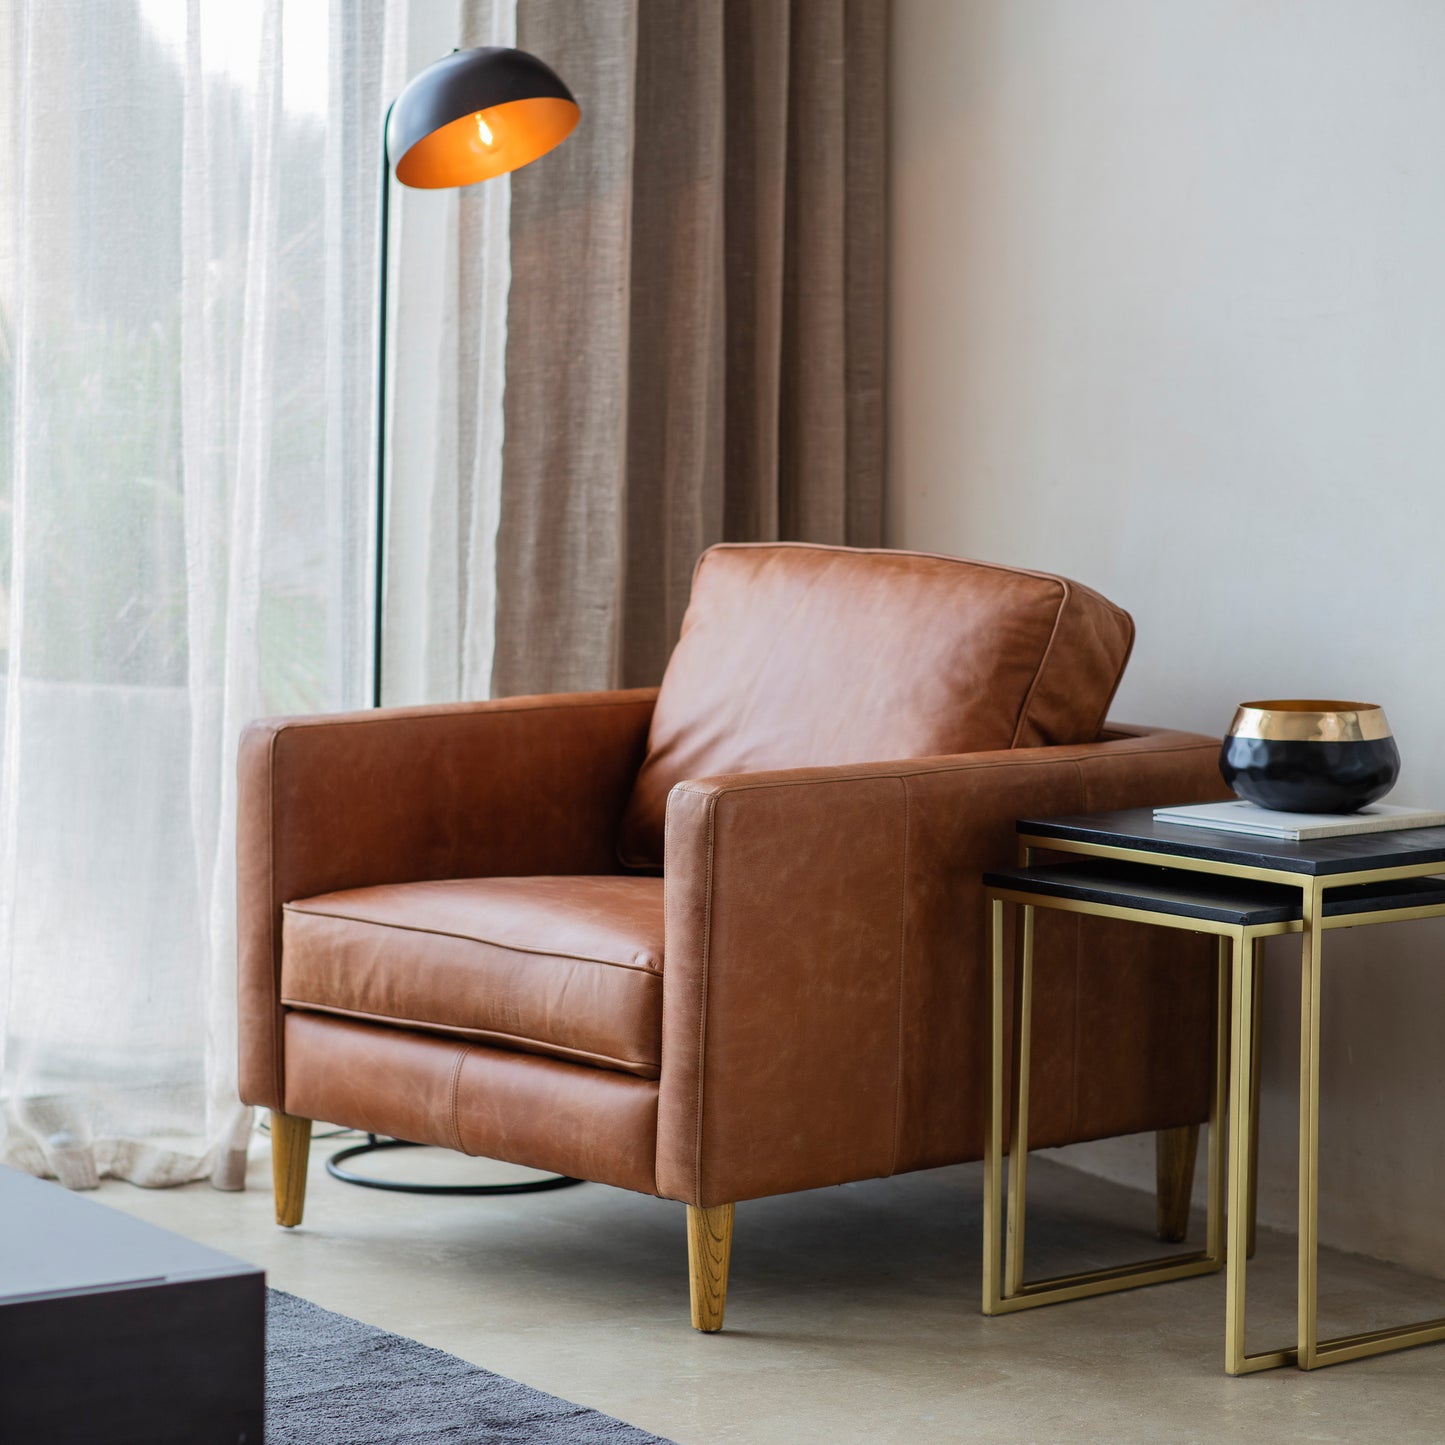 An Osborne Armchair in Vintage Brown Leather adds to the interior decor of a living room.